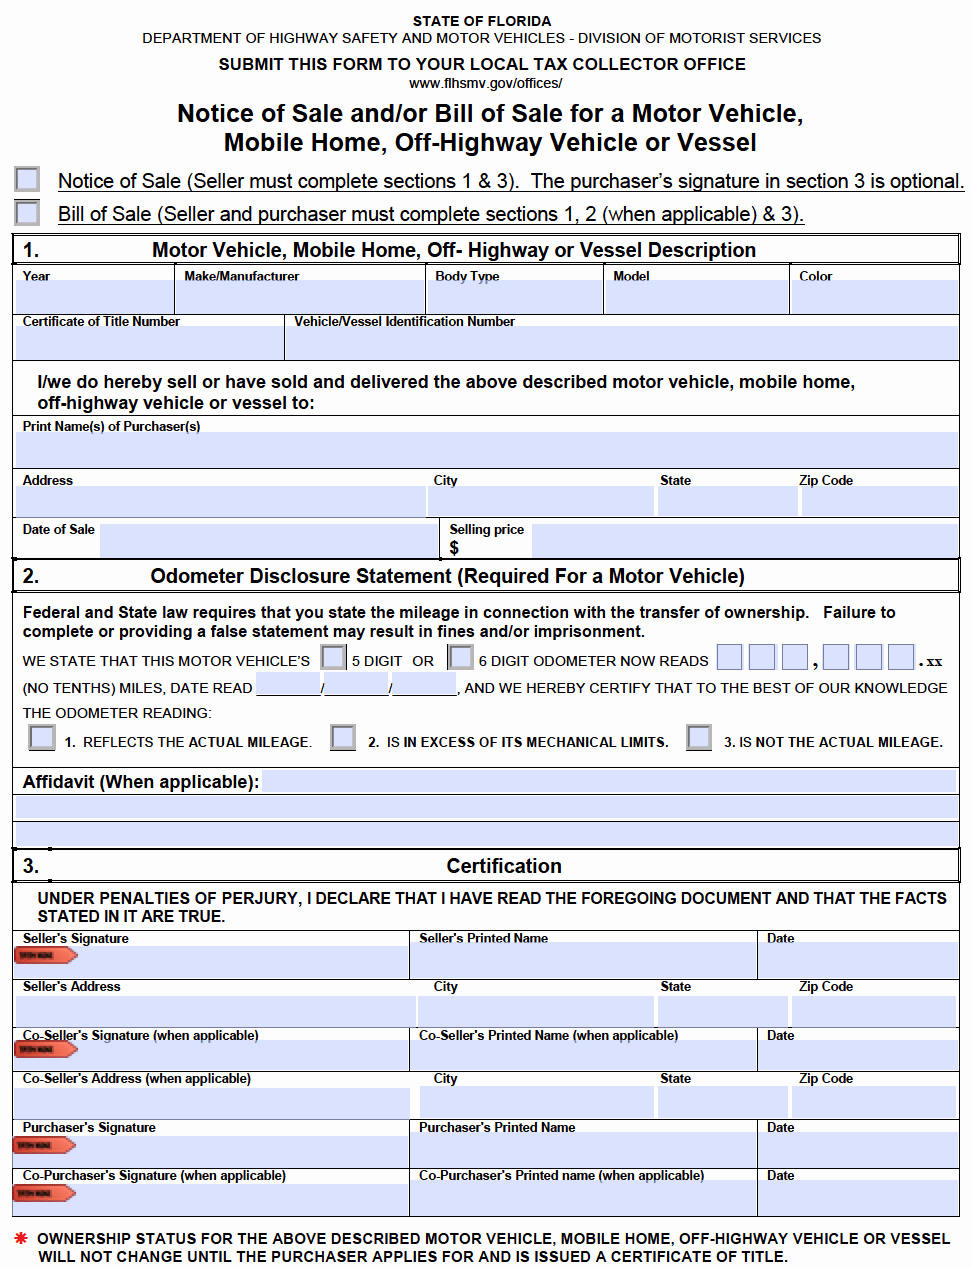 Florida Bill Of Sale for Trailer New Free Florida Dmv Bill Of Sale form for Motor Vehicle